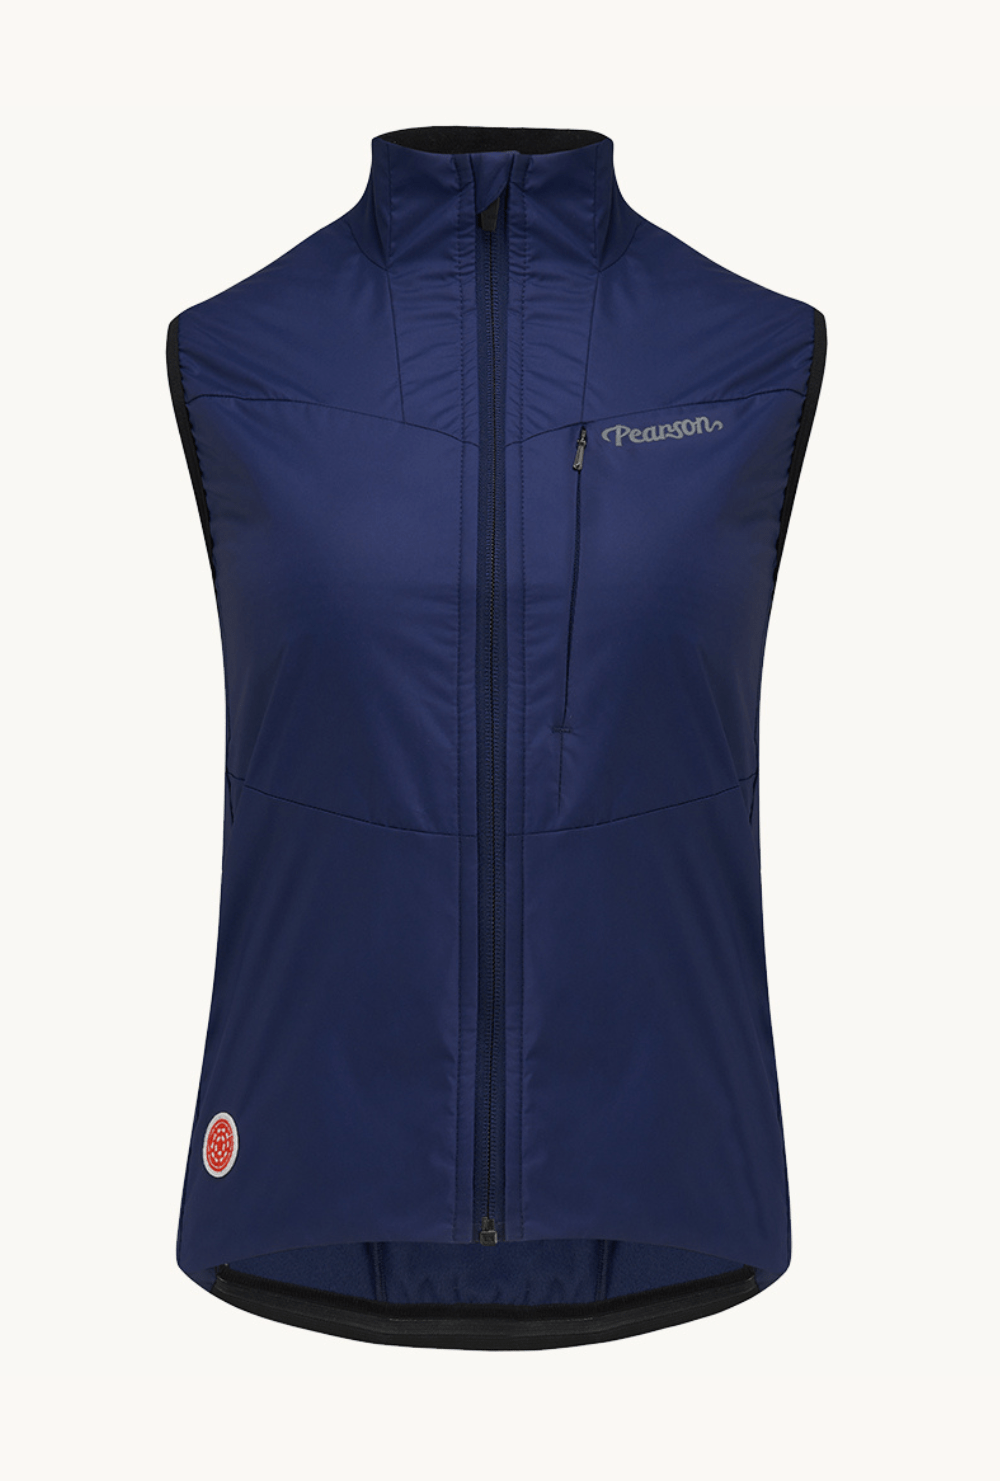 Pearson 1860  Feel The Benefits - Womens Road Insulated Gilet Blue Ink  Small / Blue Ink